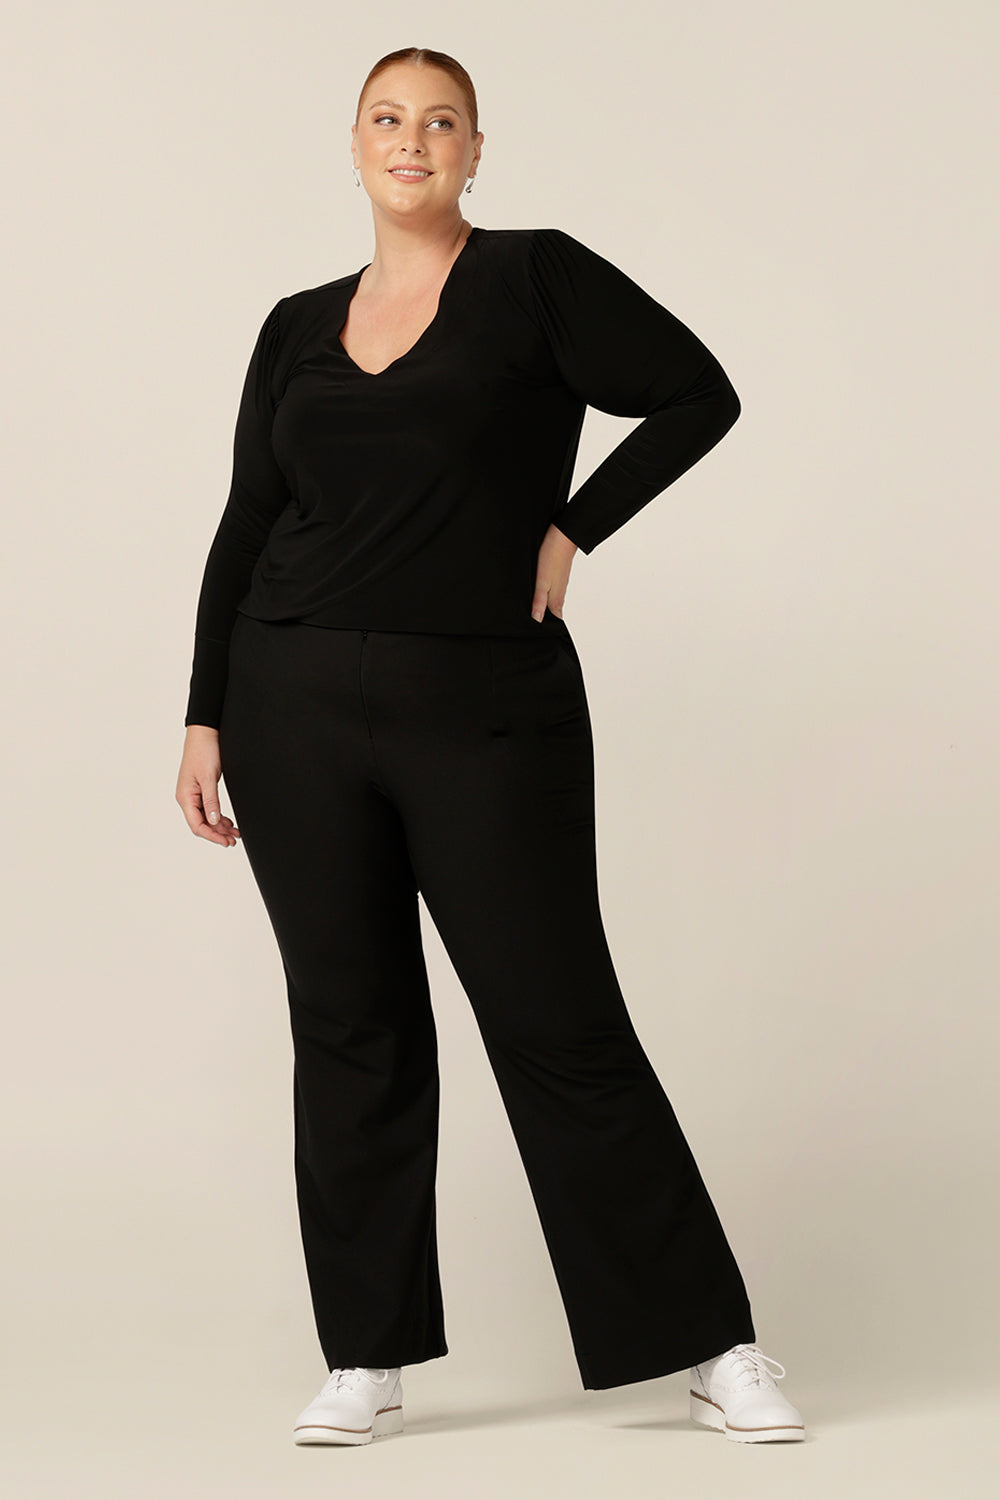 A size 18, fuller figure woman wears a long sleeve, V neck top in black jersey. Worn with black bootleg trousers and sneakers, this black top is styled for casual wear.  Comfortable and easy-to-wear, this classic women's top is made in Australia by Australia and New Zealand women's clothing label, L&F.